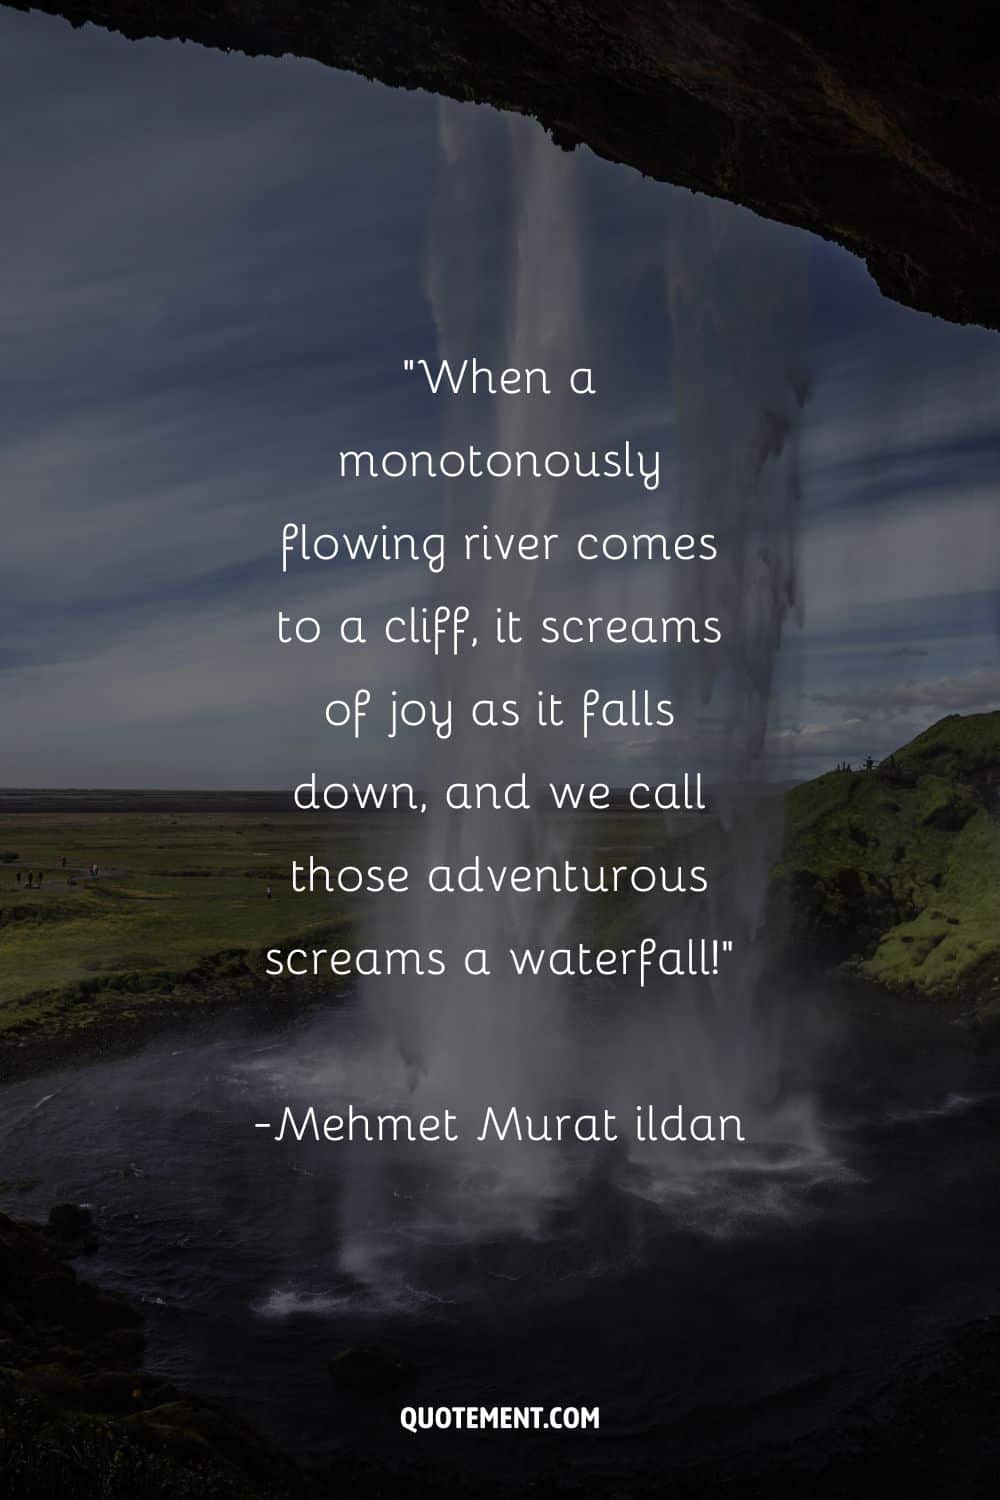 When a monotonously flowing river comes to a cliff, it screams of joy as it falls down, and we call those adventurous screams a waterfall